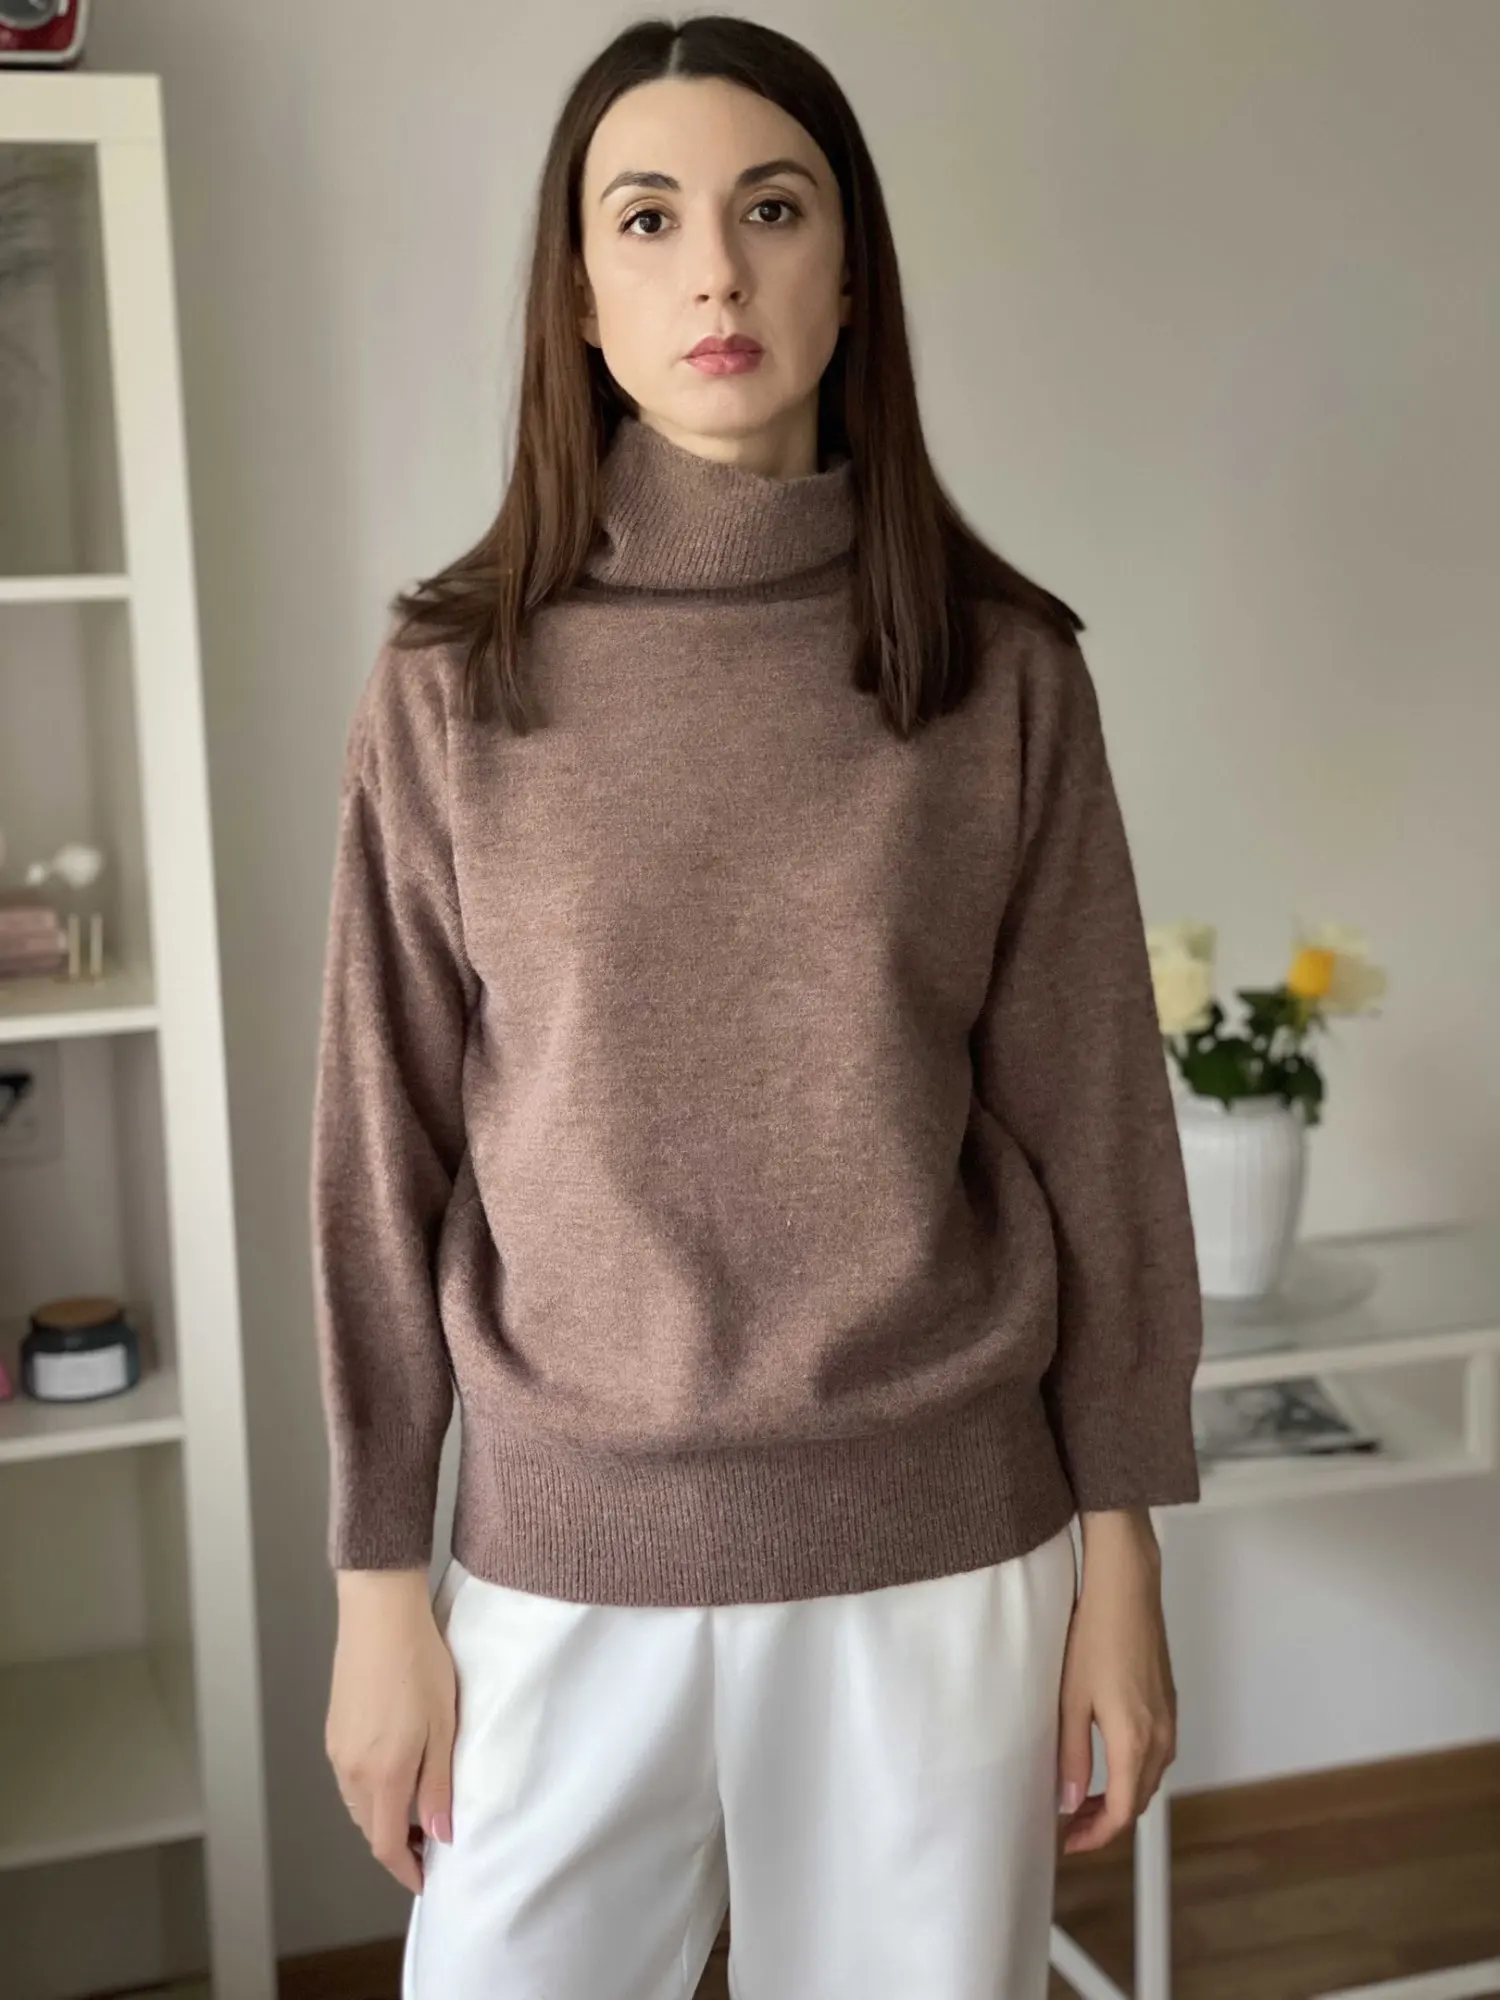 WYWM Turtle Neck Cashmere Sweater Women Korean Style Loose Warm Knitted Pullover 2021 Winter Outwear Lazy Oaf Female Jumpers photo review